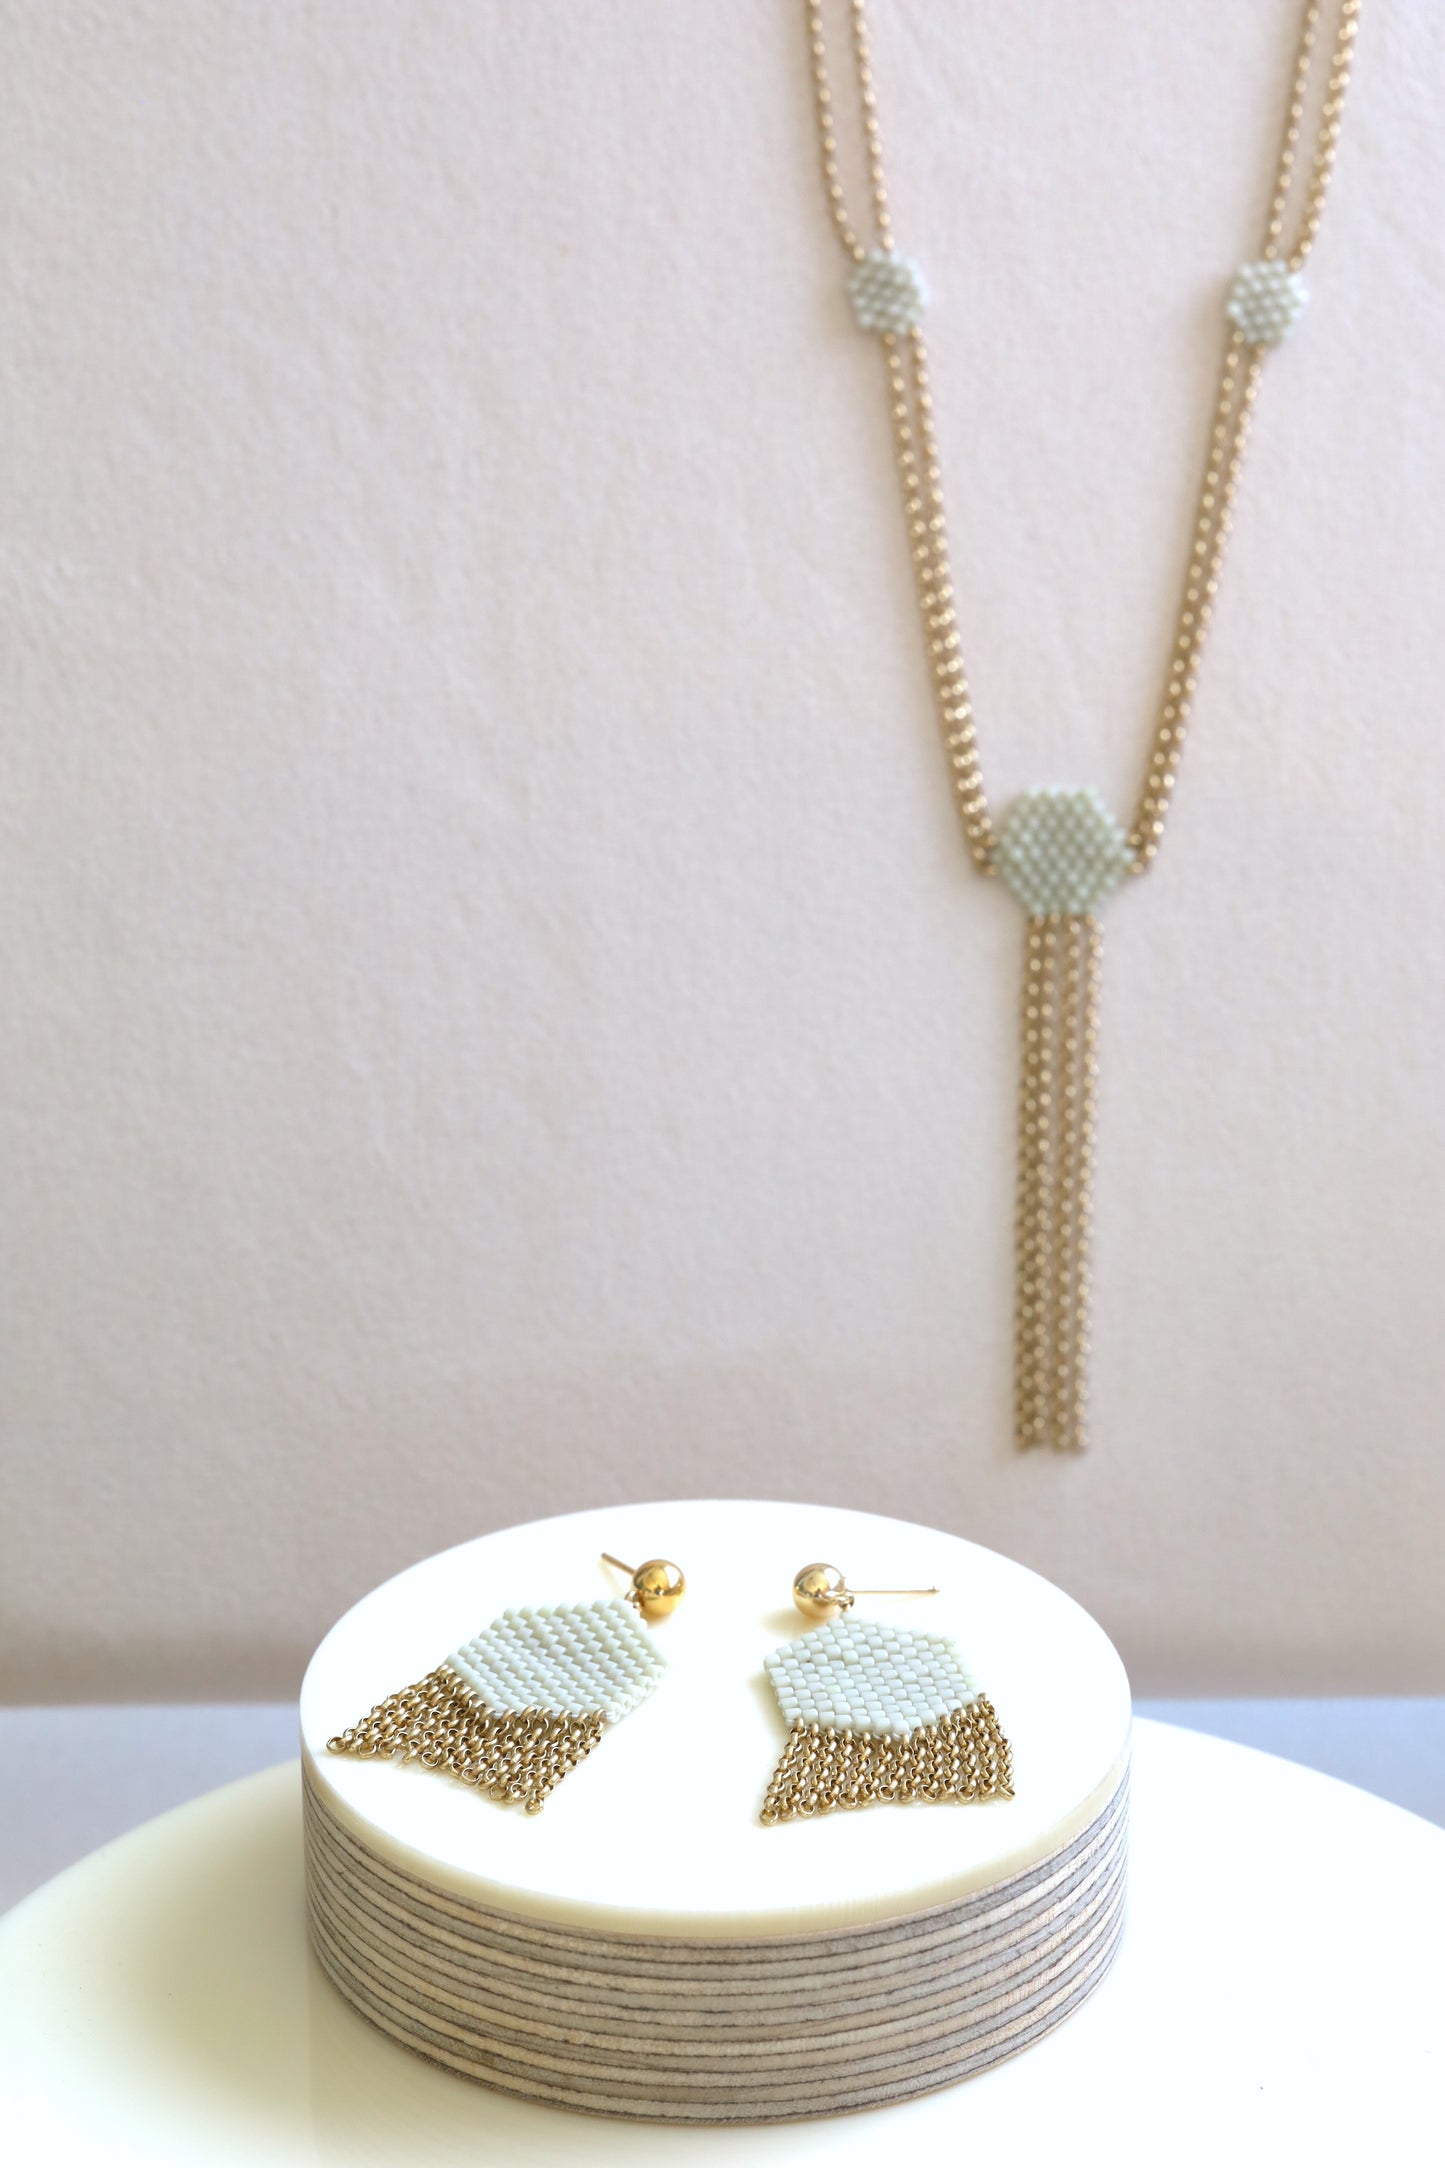 Gold and off-white beaded earrings and necklace with 14k gold fill chain.